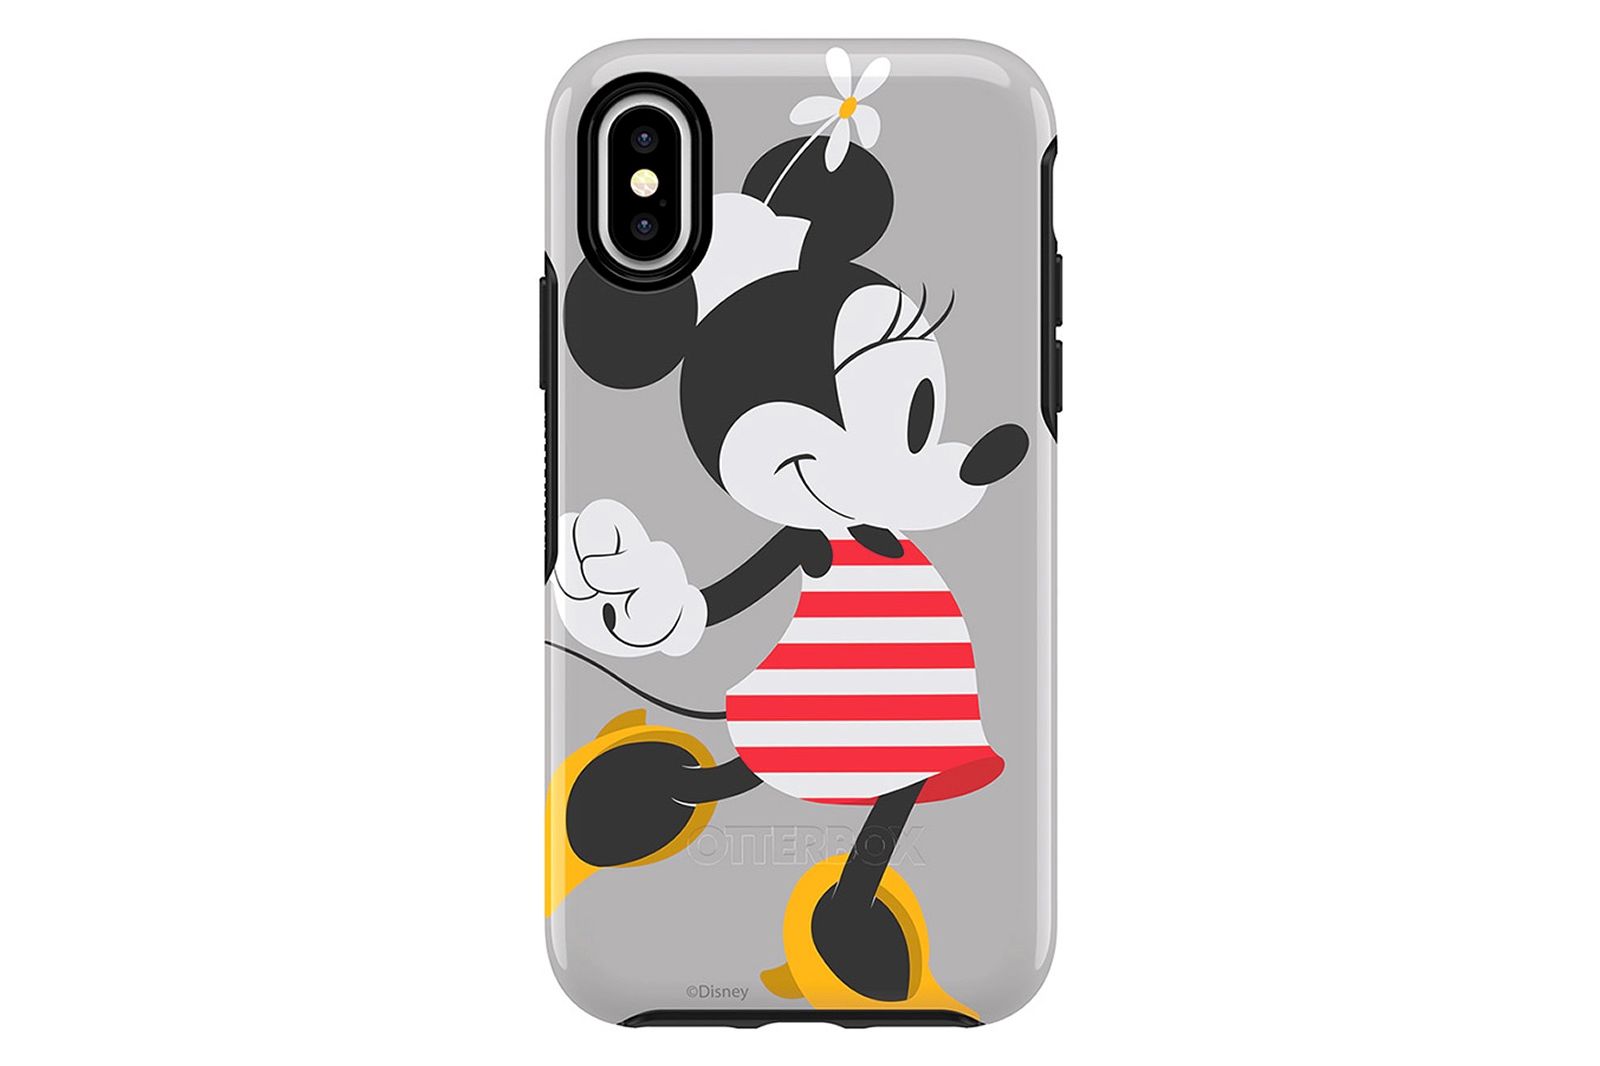 Best Disney Otterbox cases Protection fit for a Princess or a mouse image 3